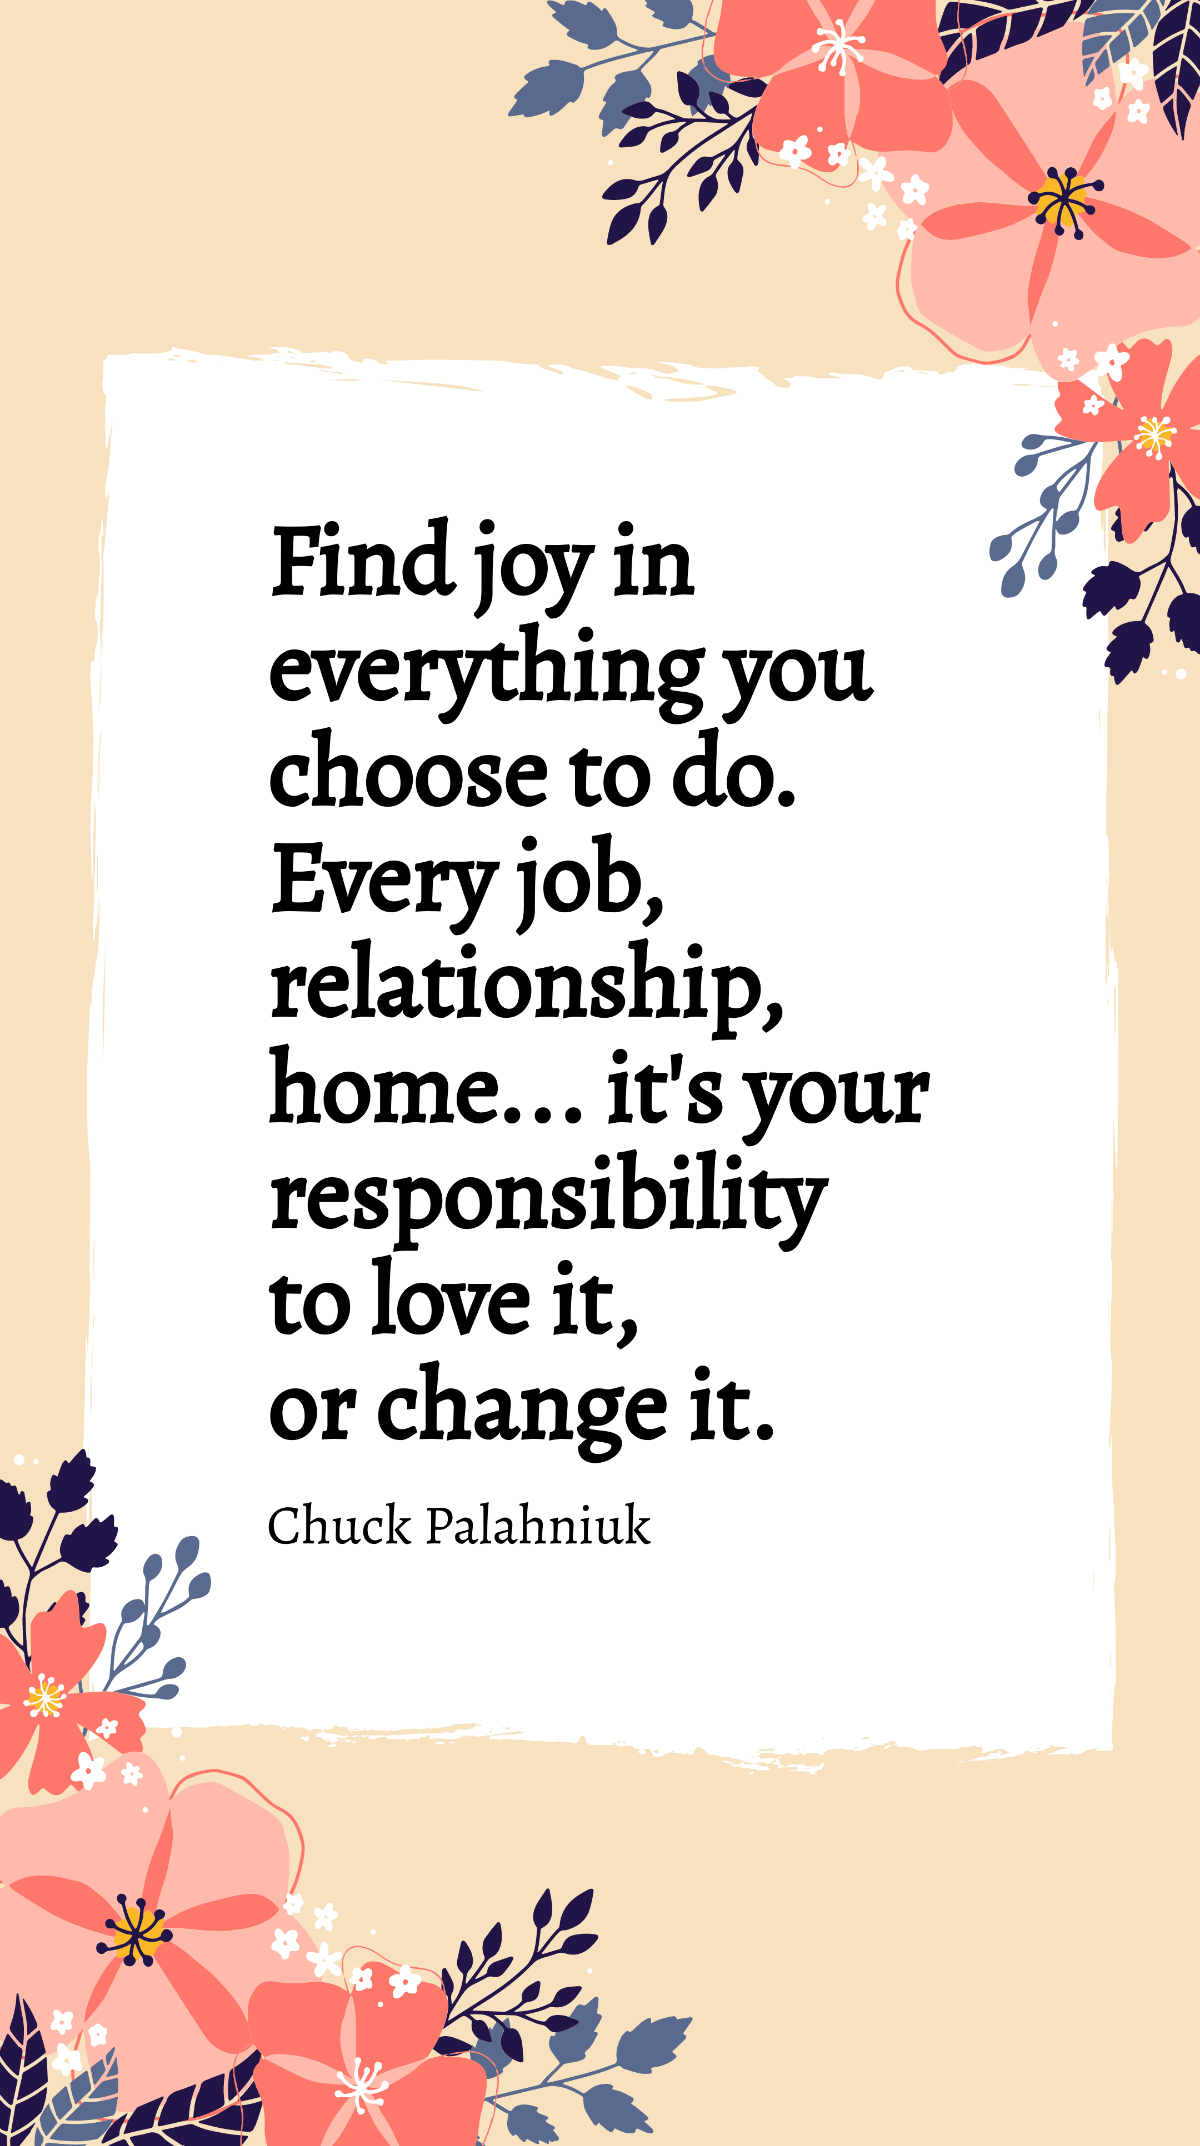 Chuck Palahniuk - Find joy in everything you choose to do. Every job, relationship, home... it's your responsibility to love it, or change it. Template